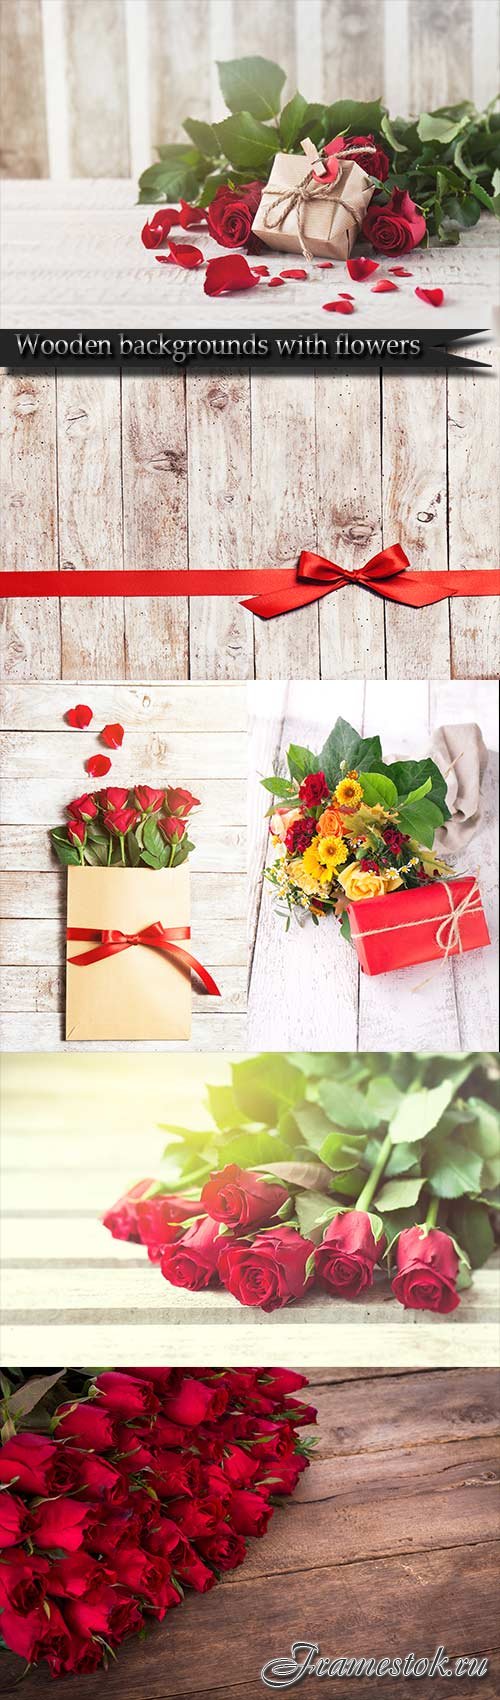 Wooden backgrounds with flowers